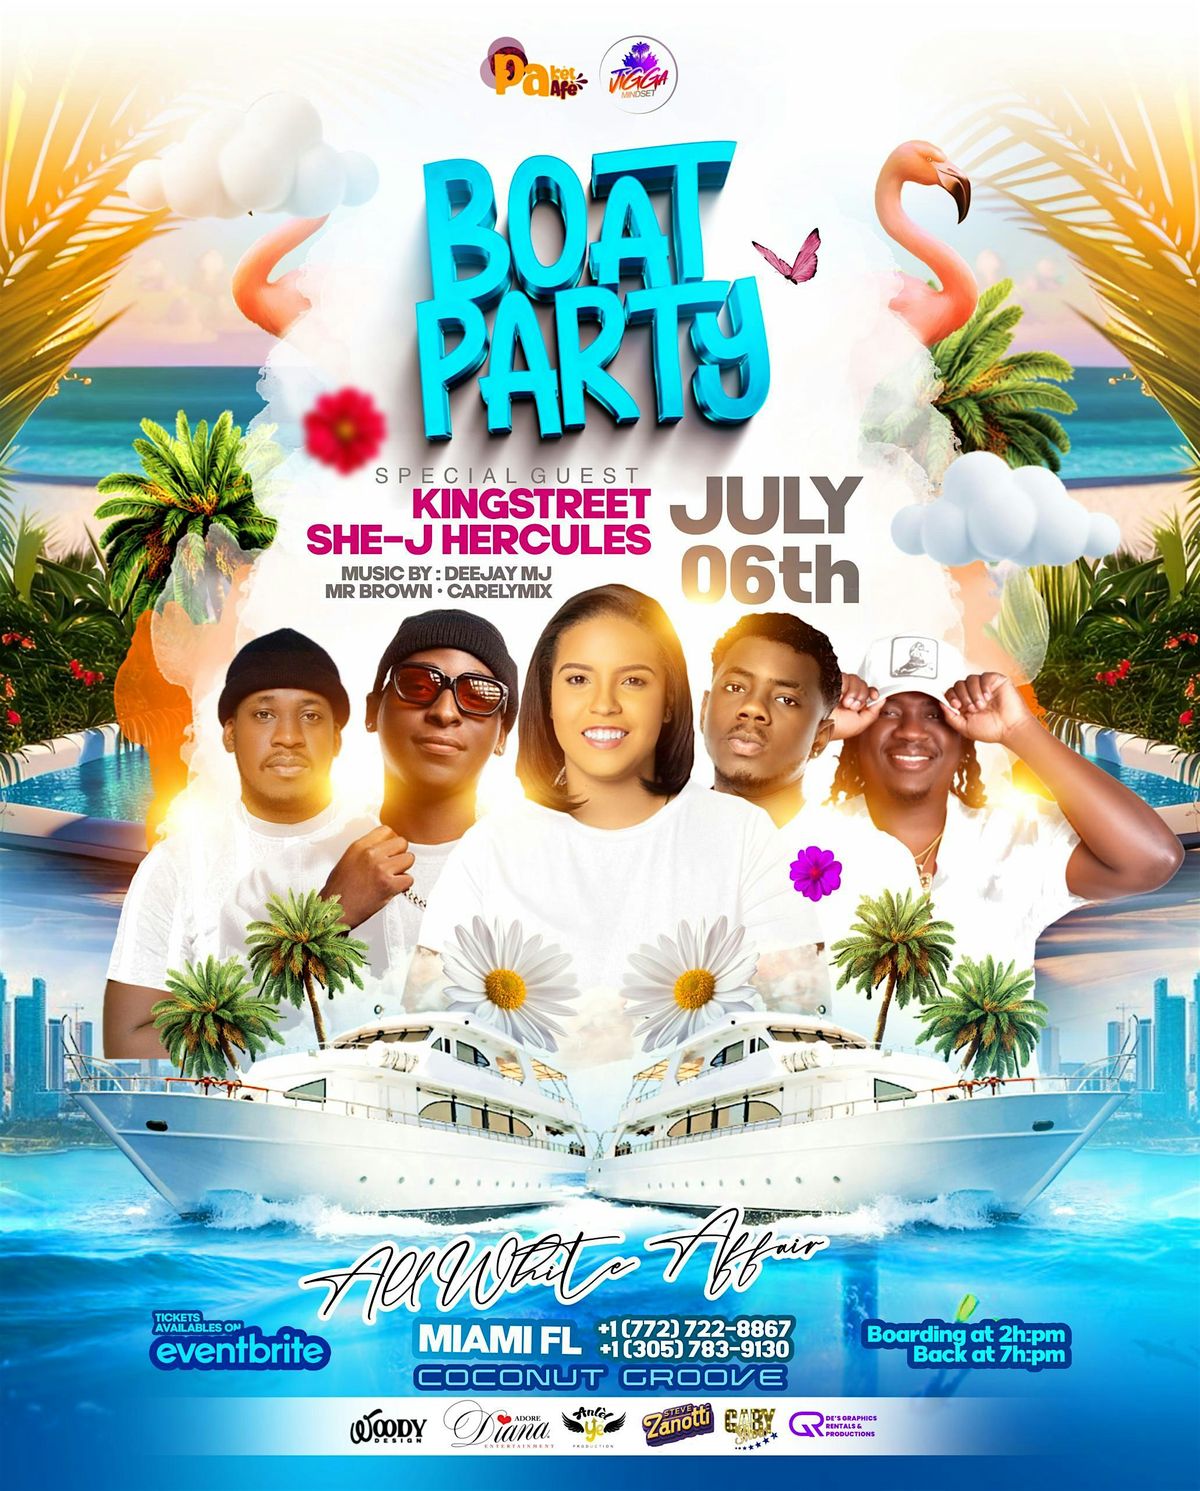 All white Boat Party